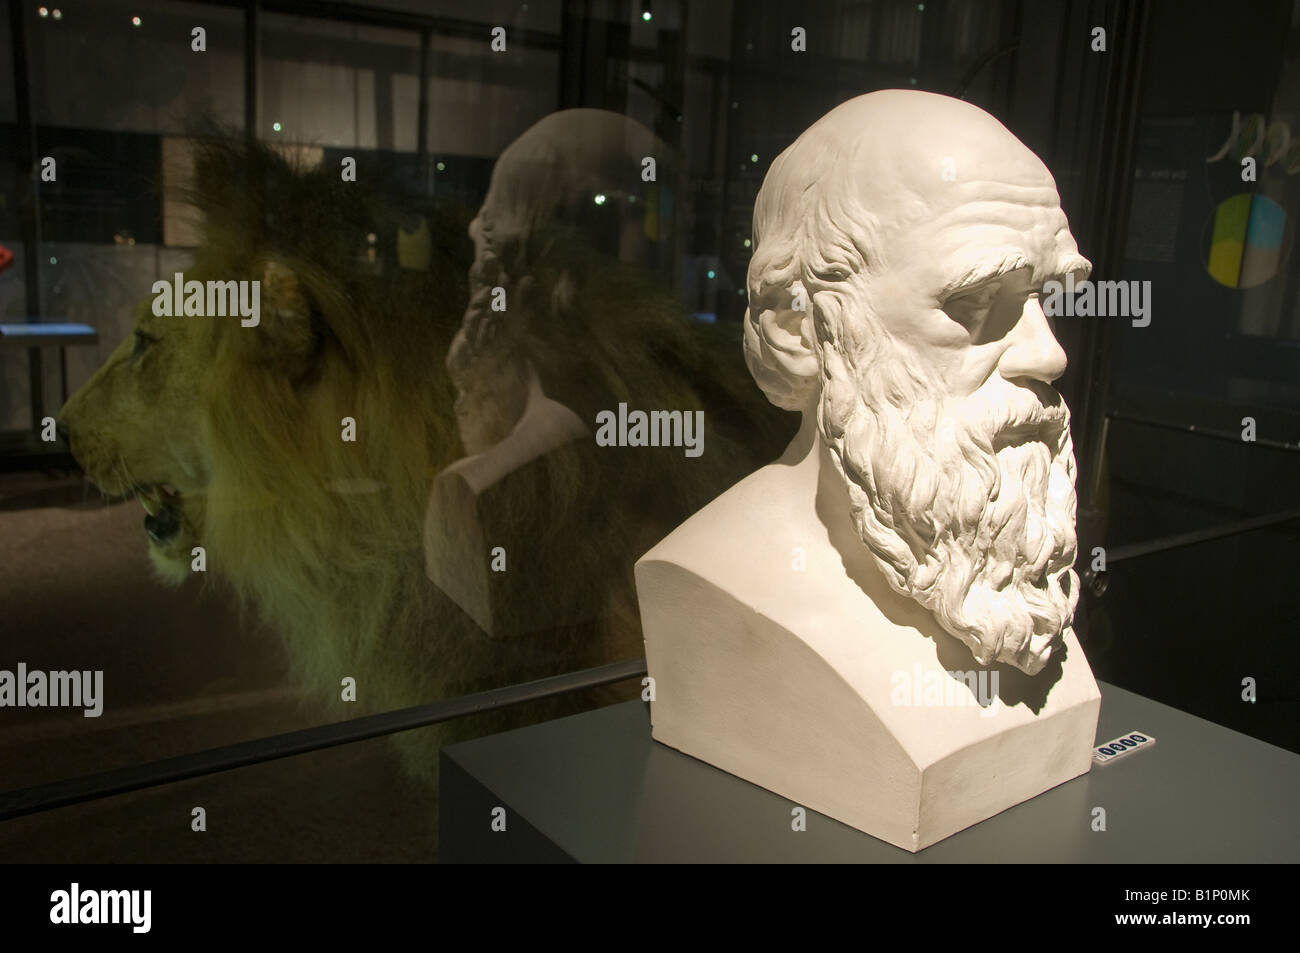 Bust of Charles Darwin displayed at the Museum fur Naturkunde natural history museum located in Berlin, Germany Stock Photo